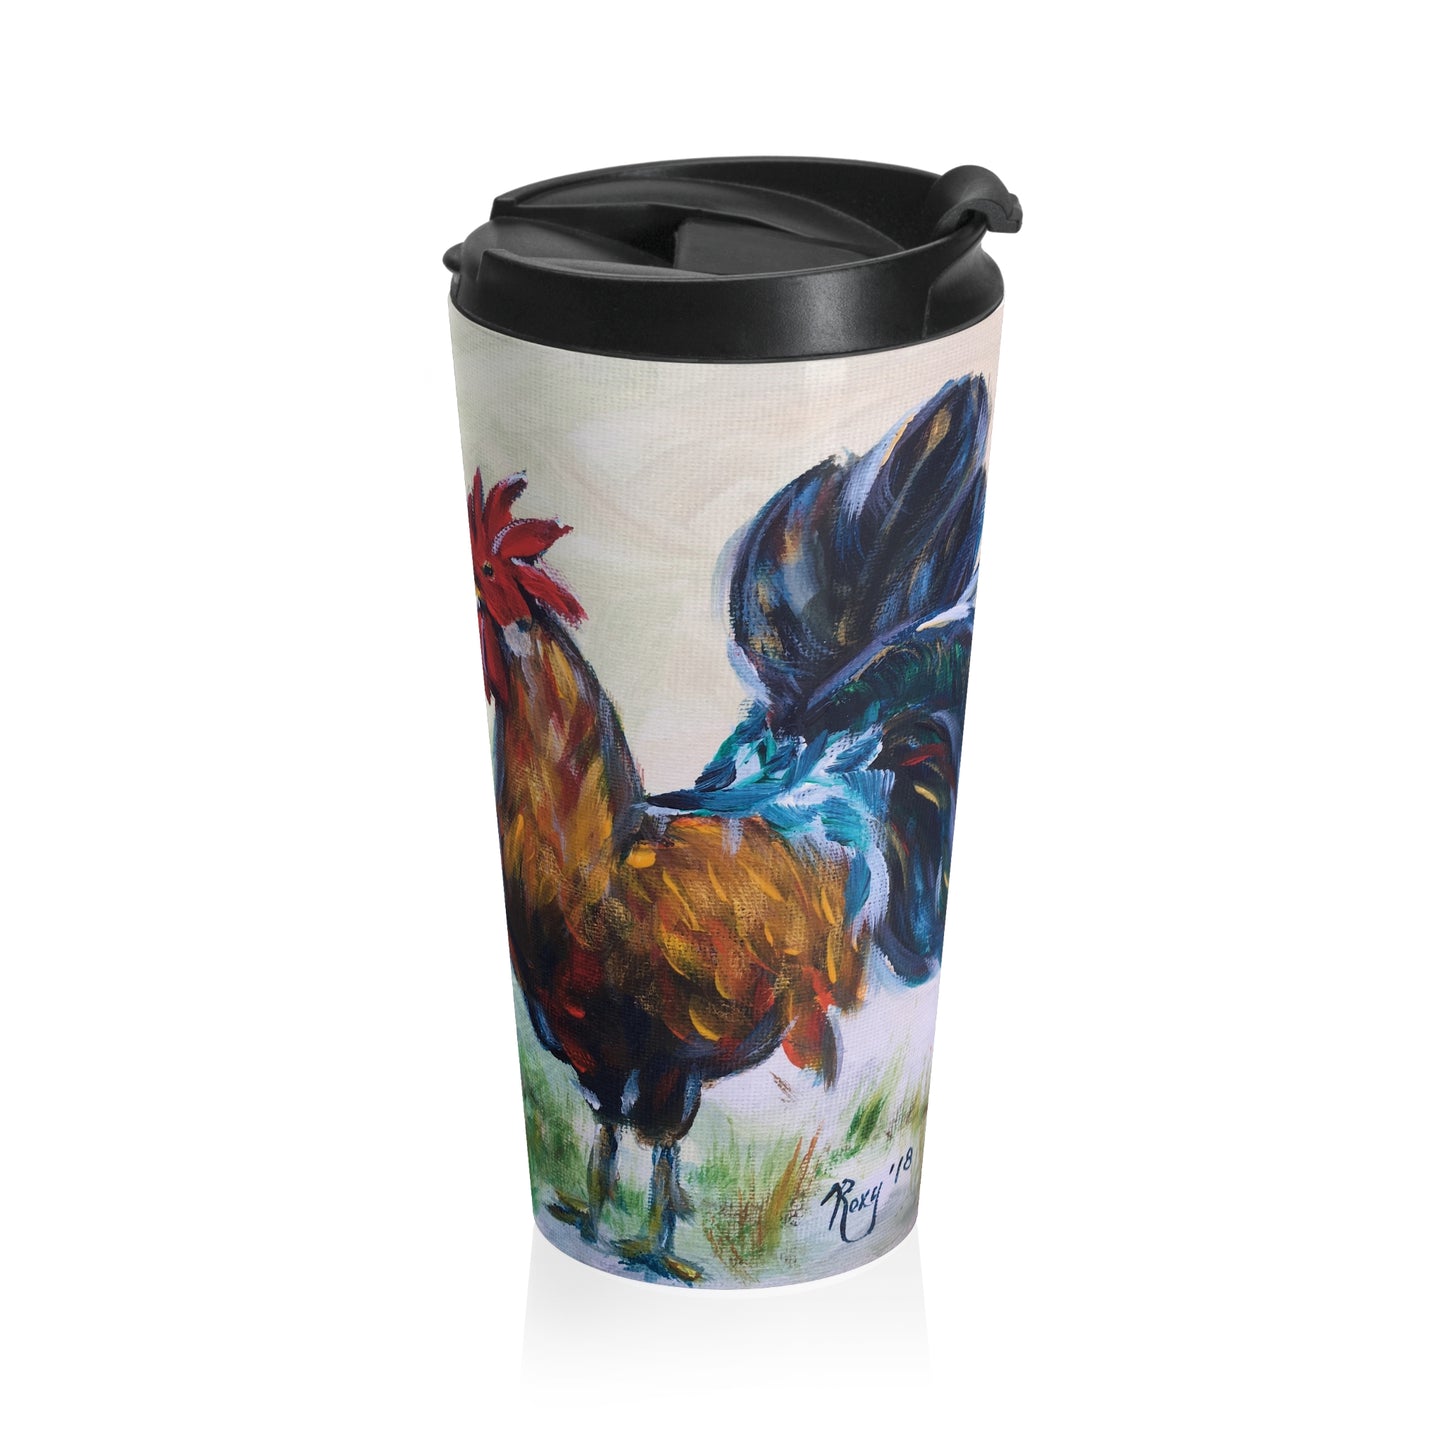 I'm Sexy and I Know it! (Rooster) Stainless Steel Travel Mug